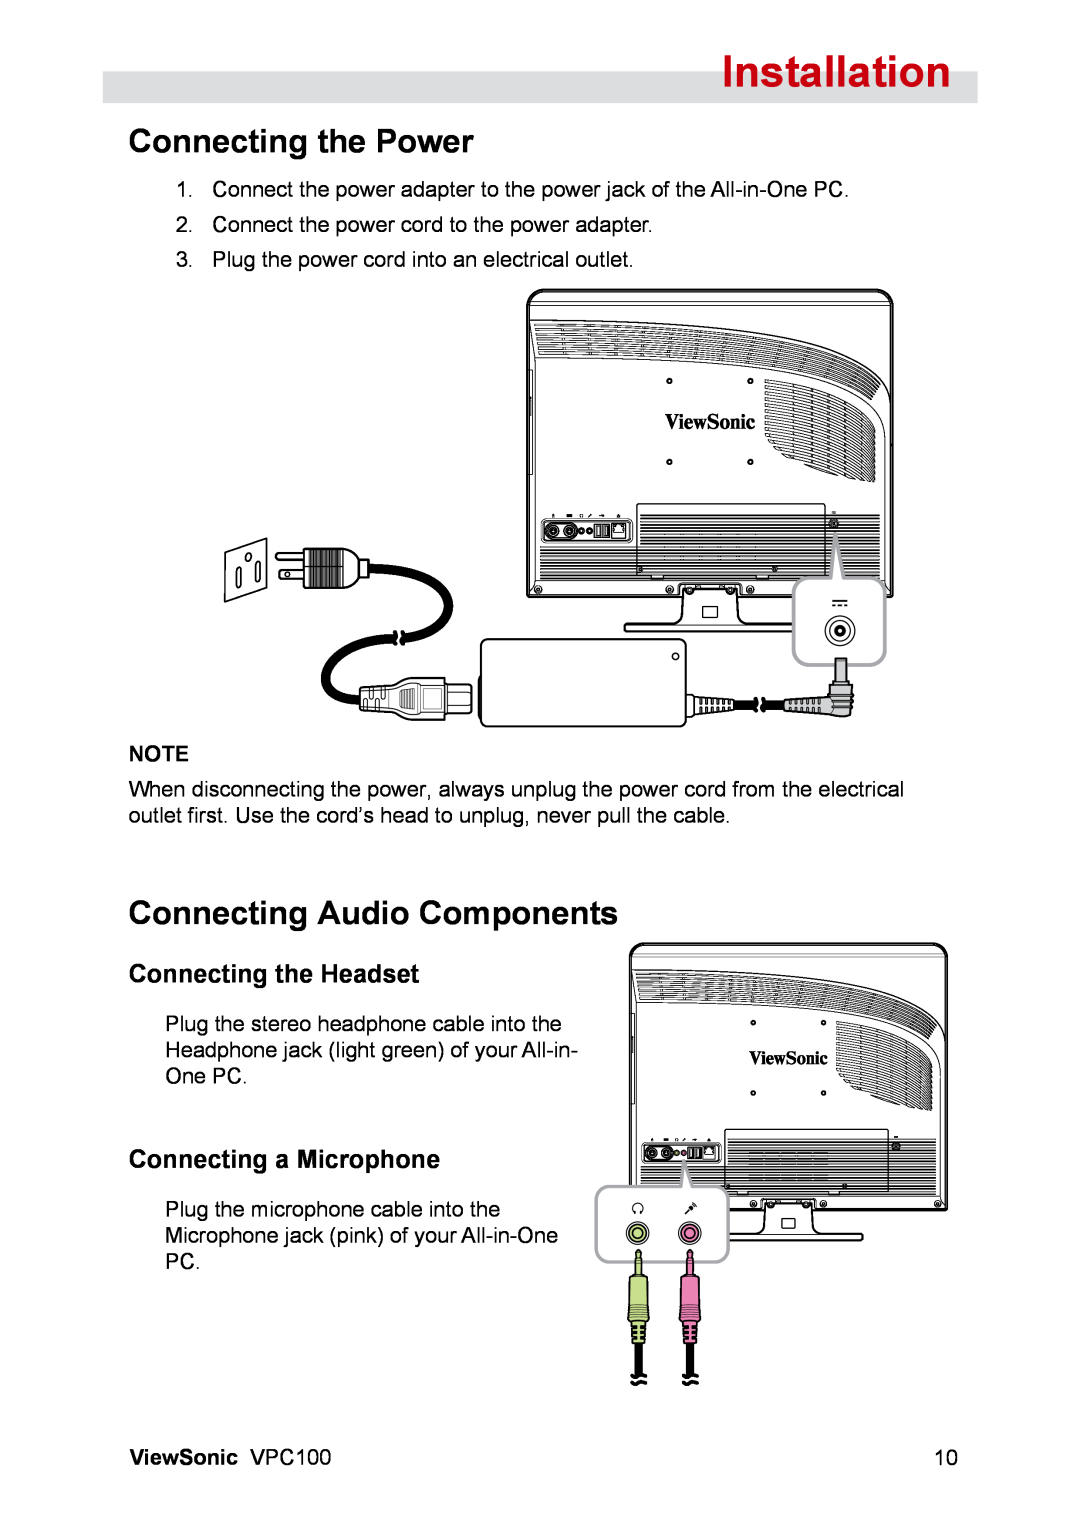 ViewSonic VPC100 manual Connecting the Power, Connecting Audio Components, Connecting the Headset, Connecting a Microphone 